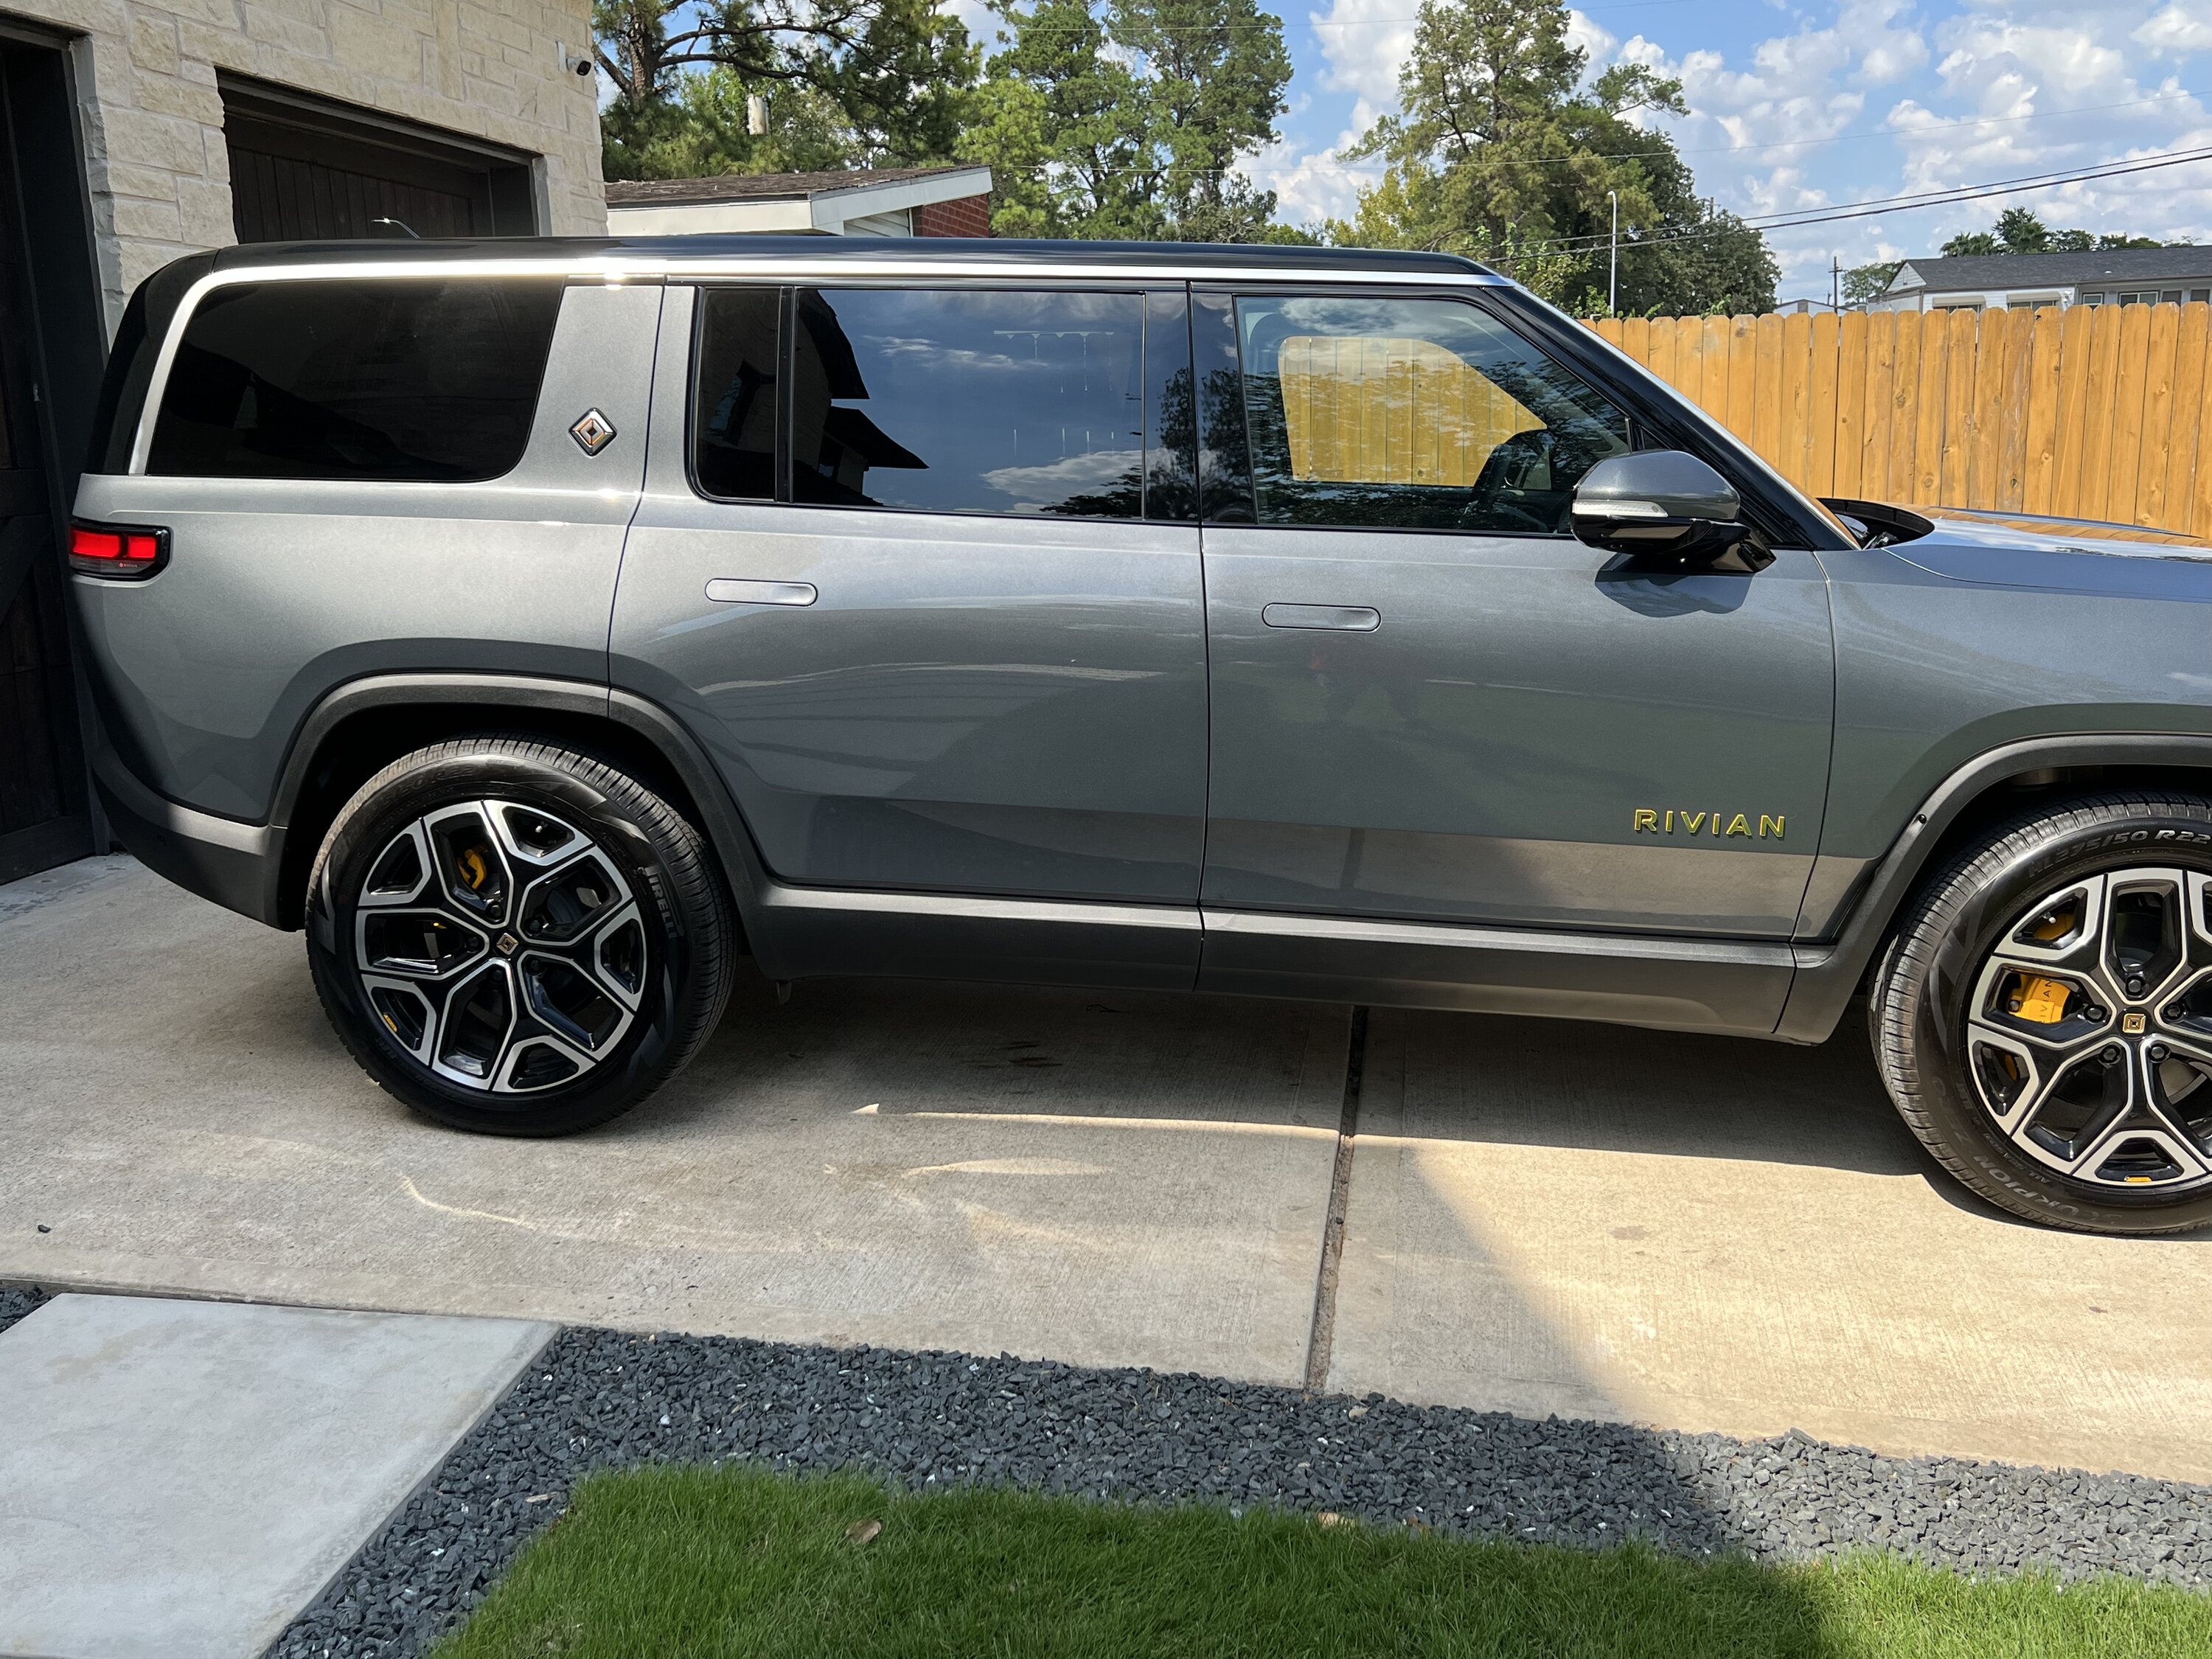 Rivian R1T R1S Any R1S pre-orders hear from guides recently? DED66448-BE3E-413C-B51C-A3EA532E0700